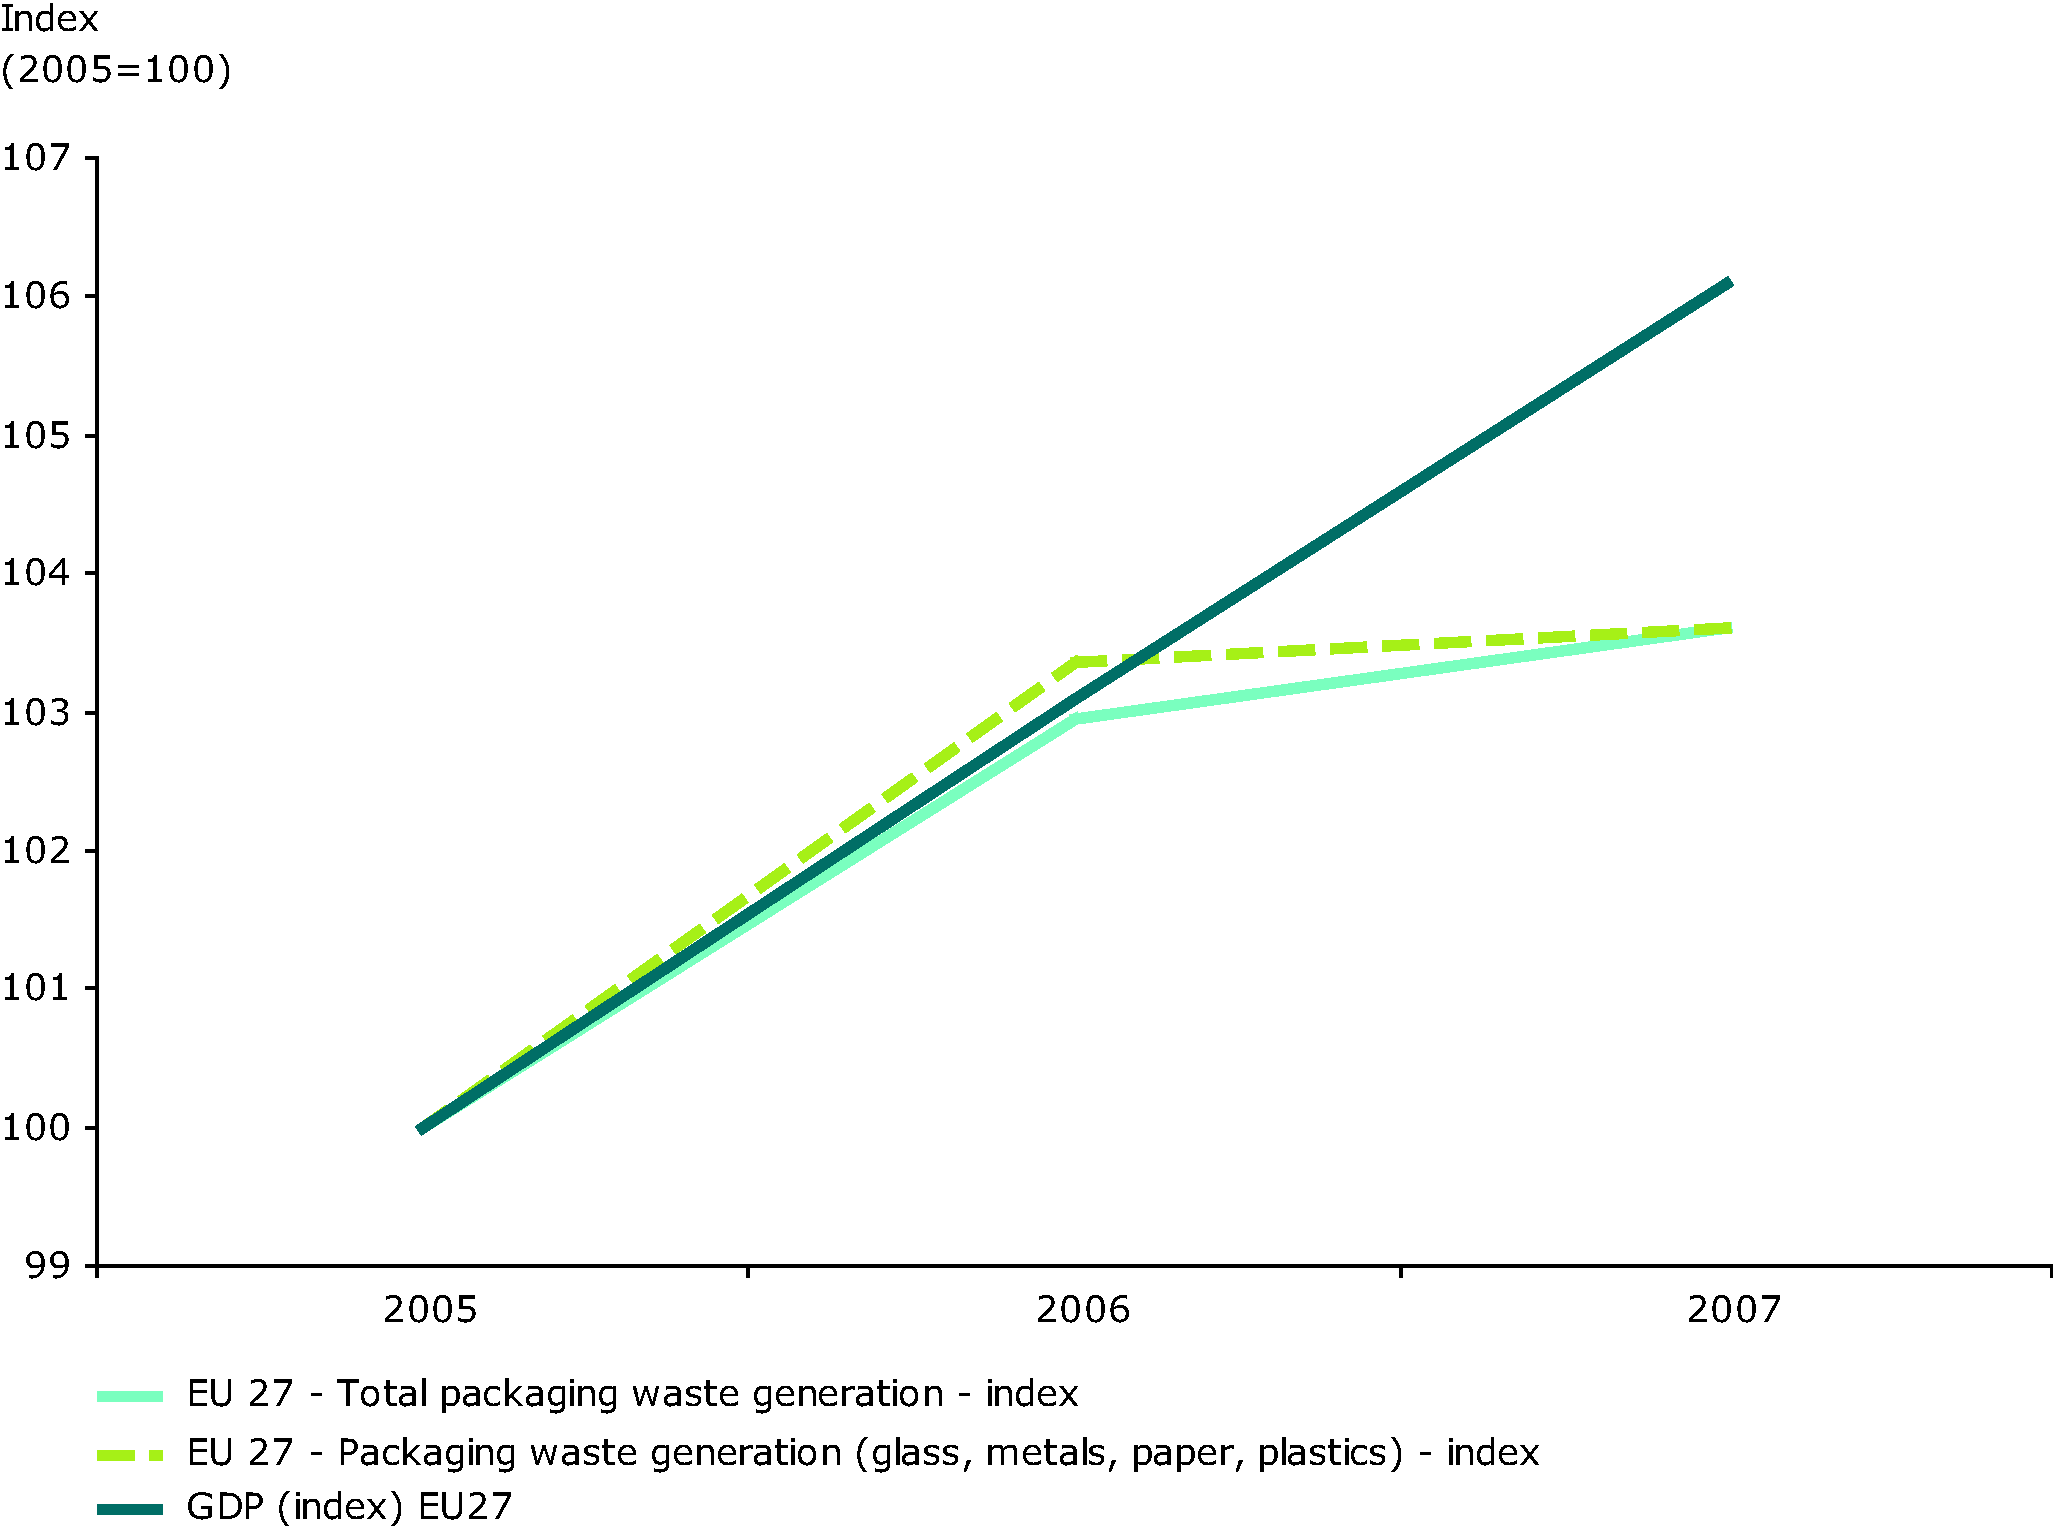 Generation of packaging waste and GDP in the EU 27